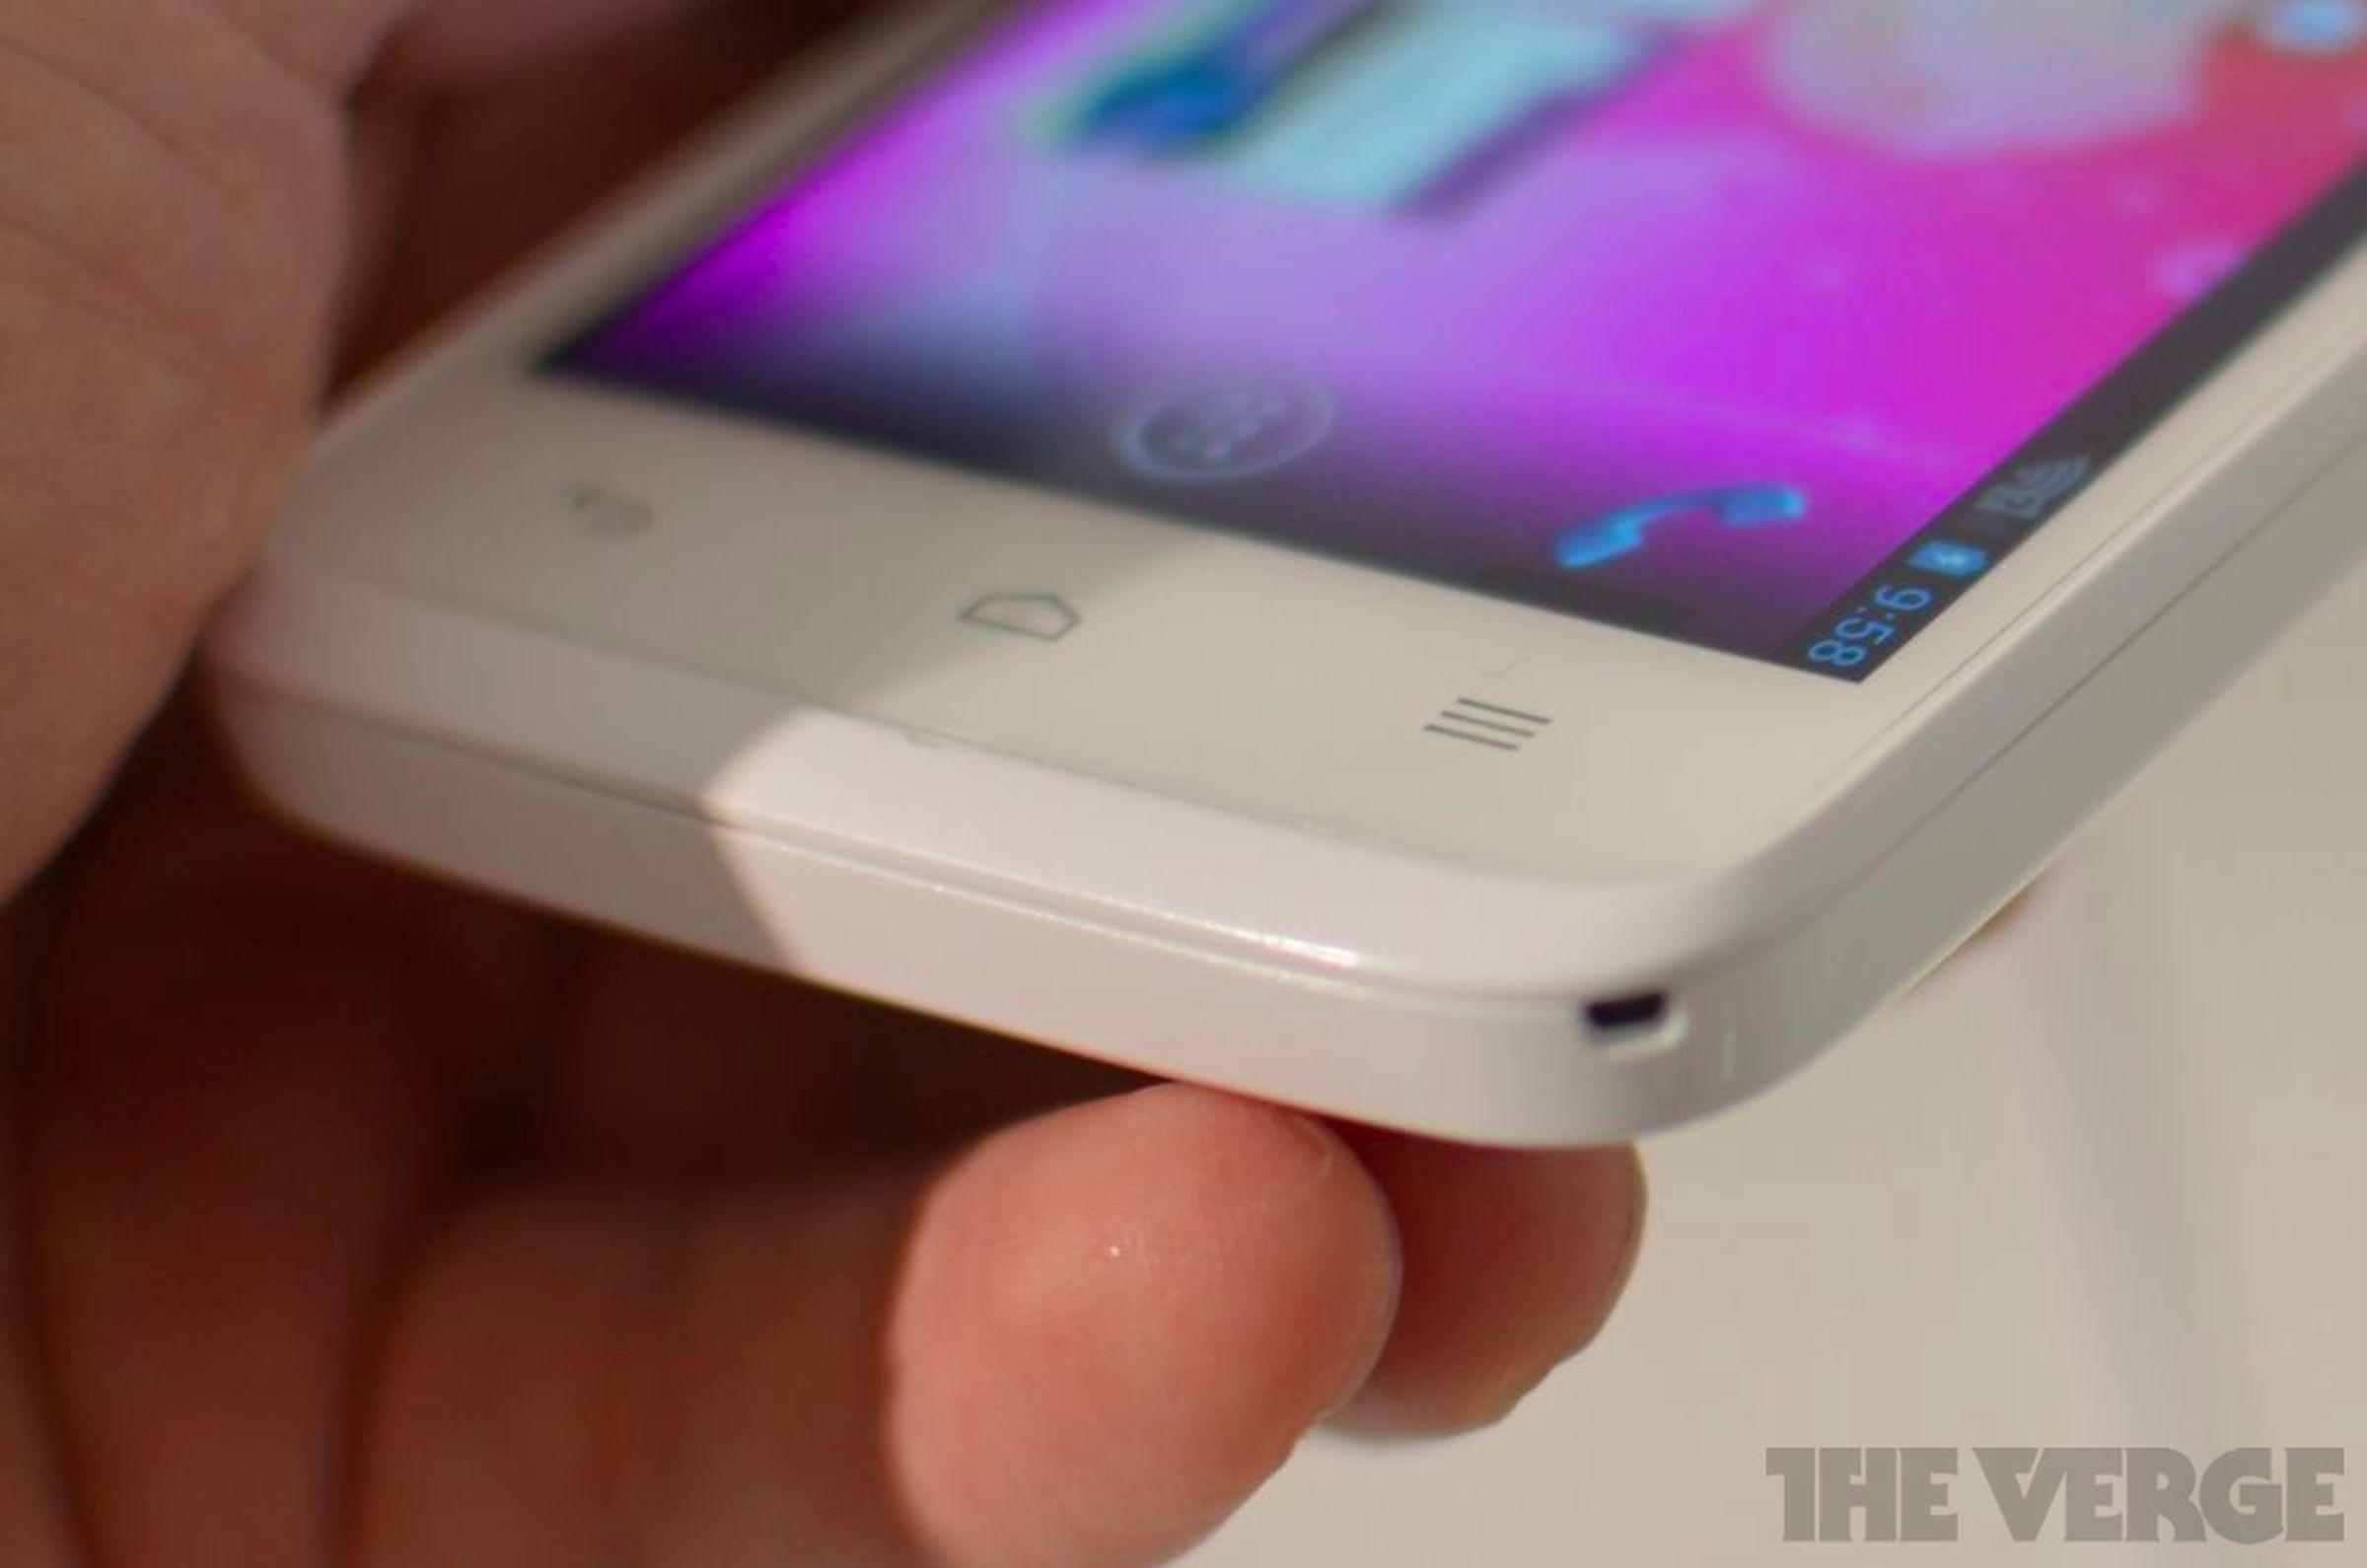 Huawei Ascend D LTE hands-on pictures